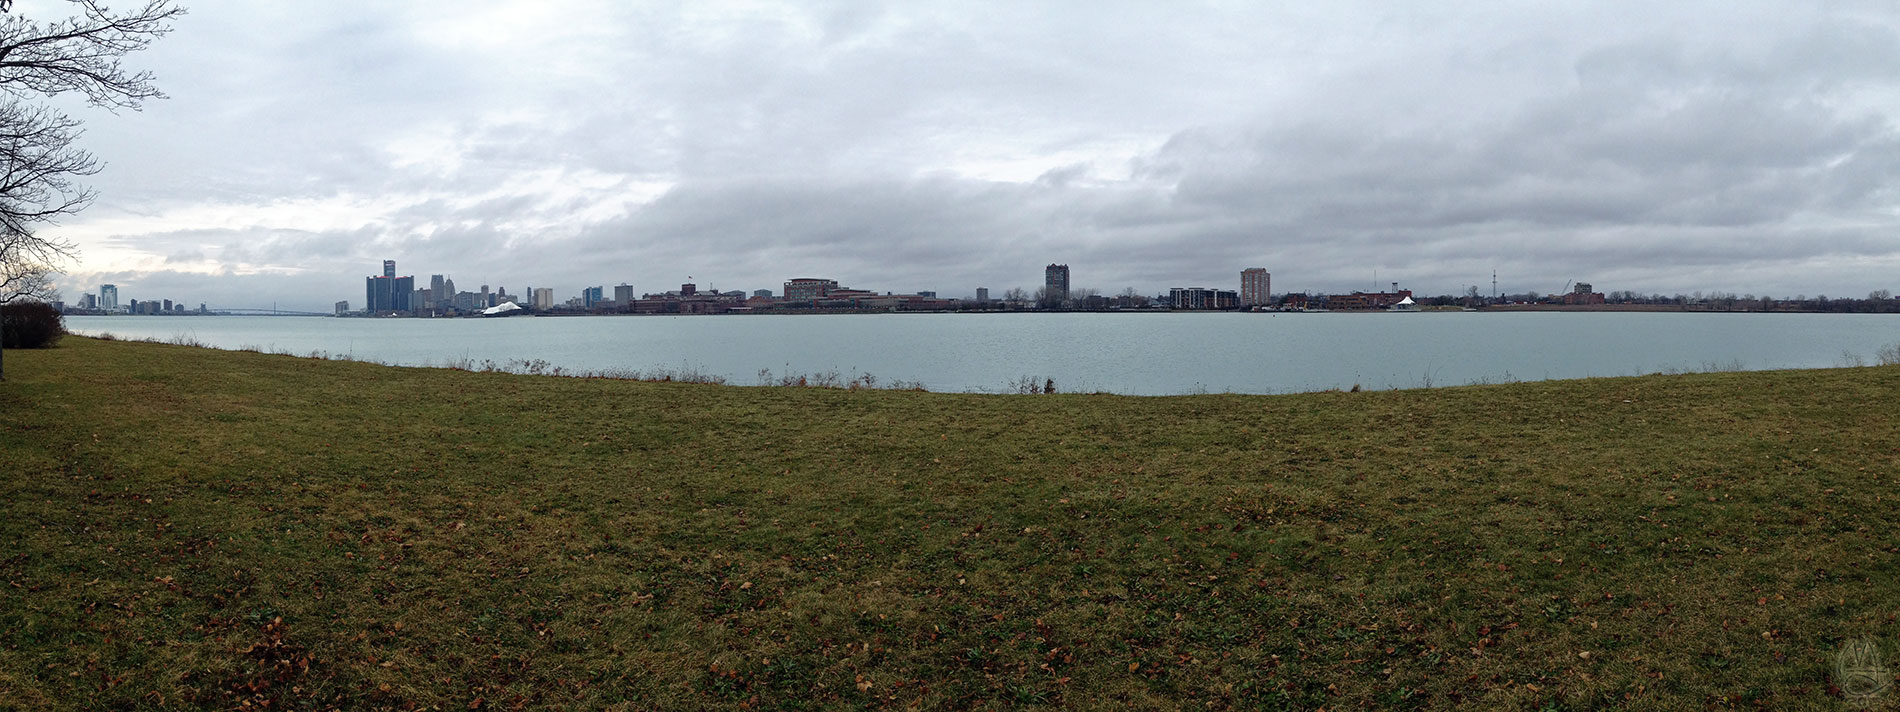 View of Detroit from Belle Isle.